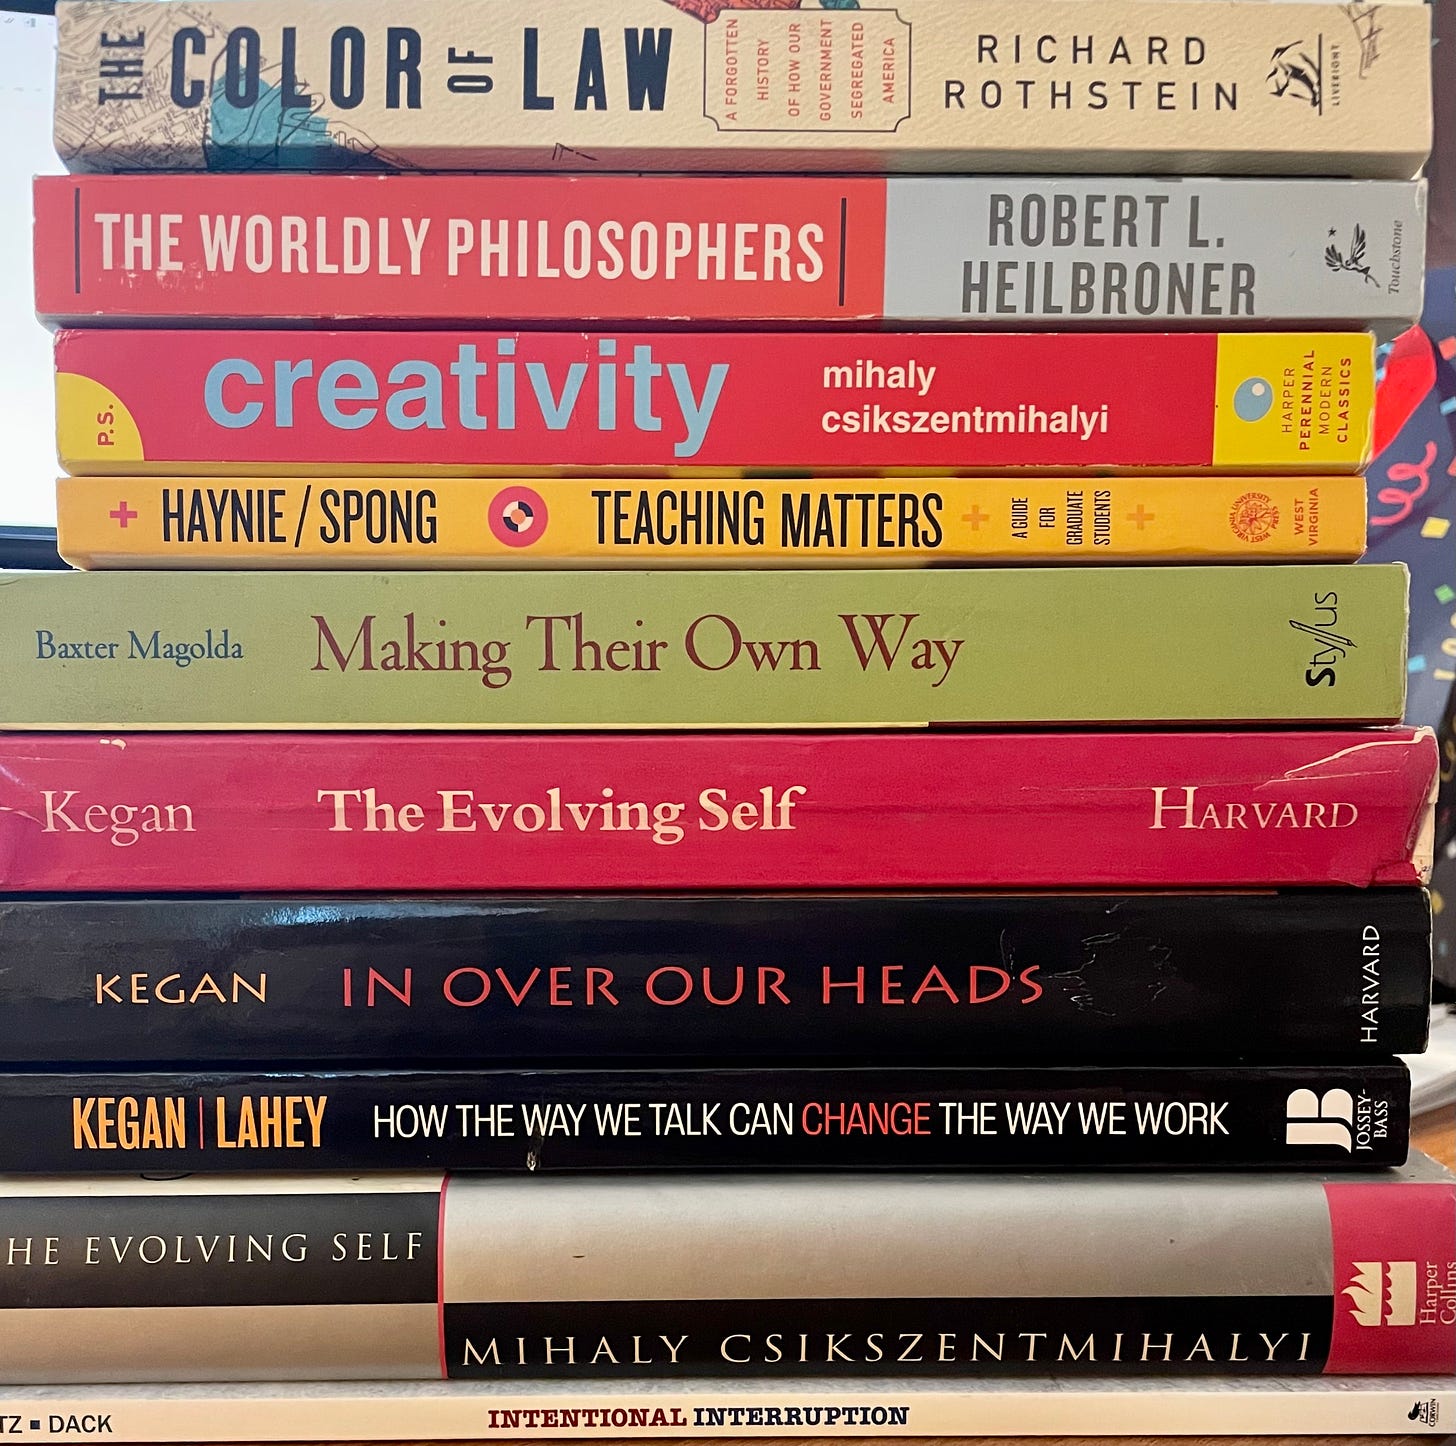 image of book spines; titles are the color of law, the worldly philosopers, creativity, making their own way, the evolving self by kegan, in over our heads, how we talk can change the way we work, the evolving self by czikszentmihalyi, intentional interruption